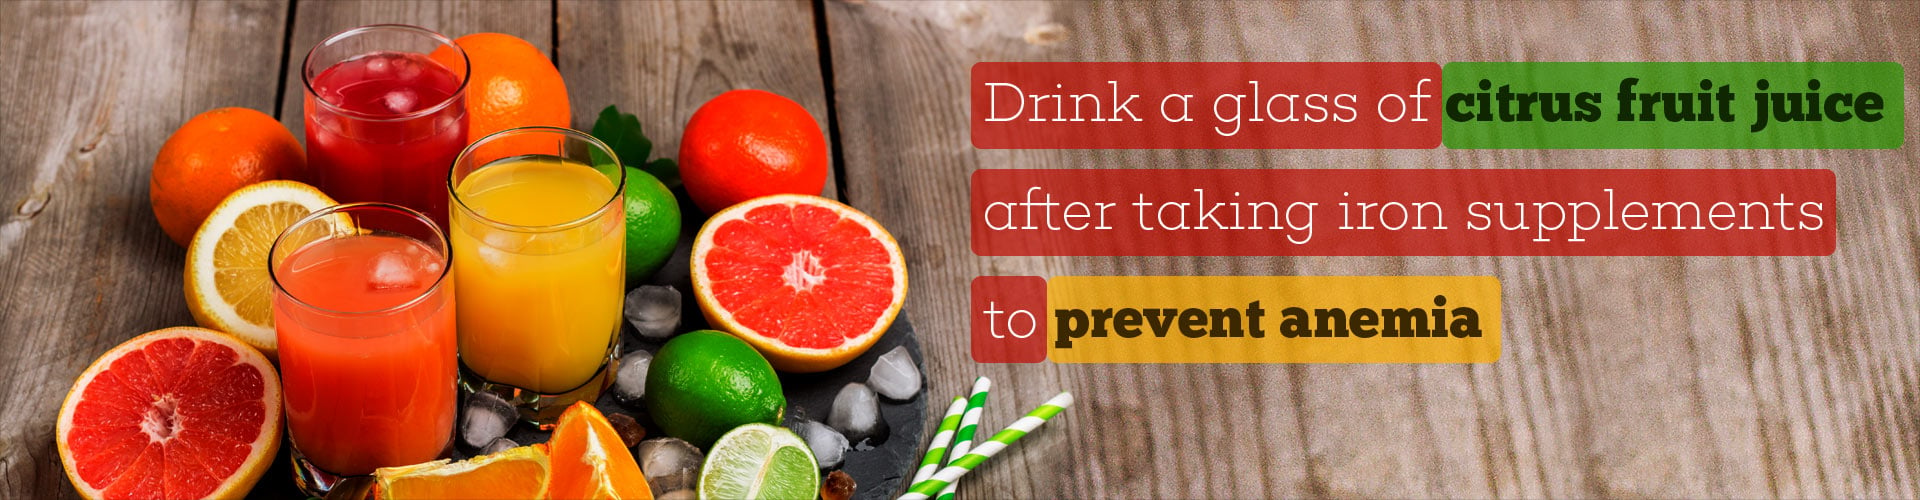 Drink a glass of citrus fruit juice after taking iron supplements to prevent anemia